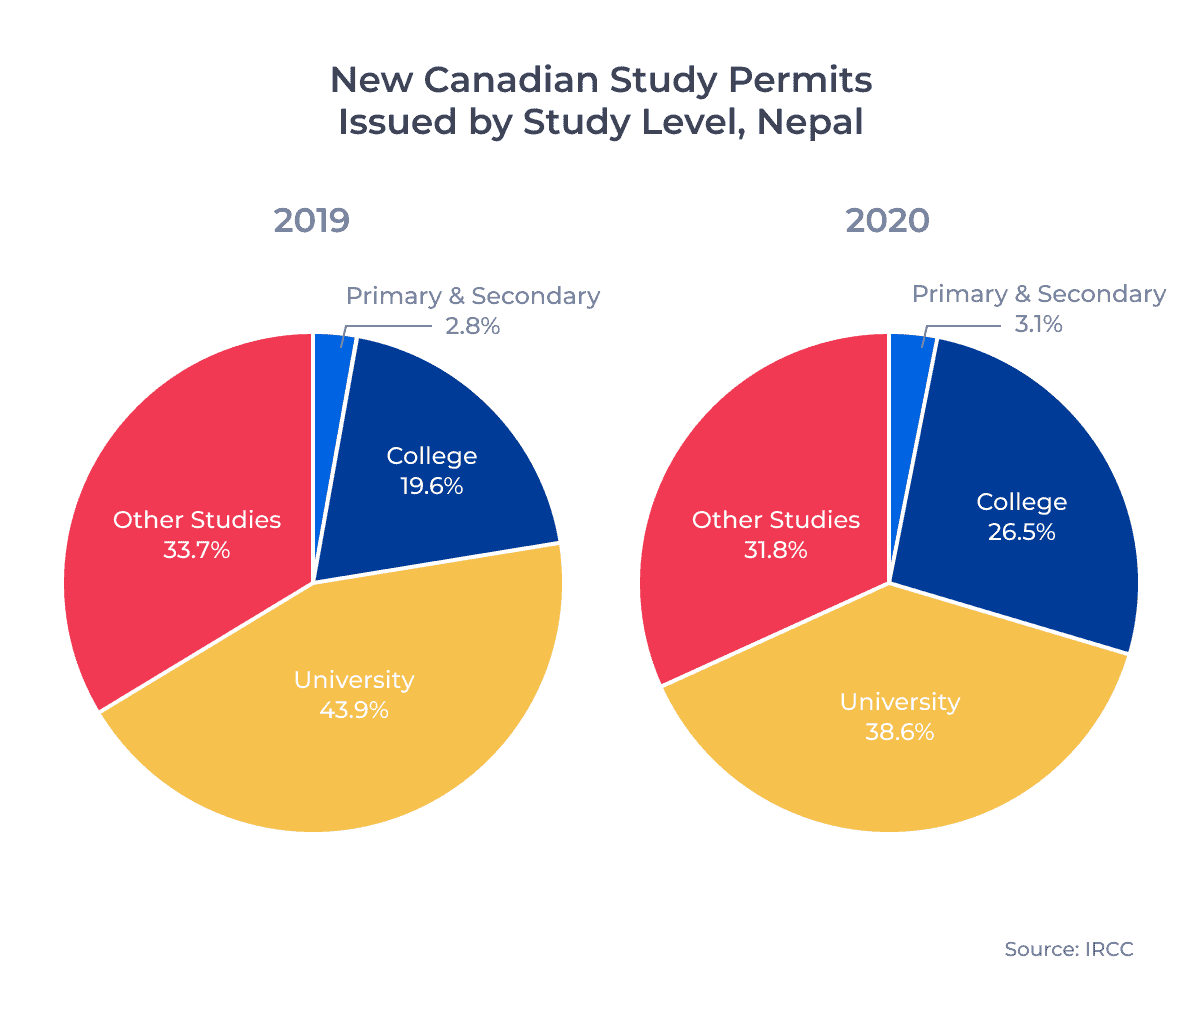 New Canadian Study Permits Issued by Study Level, Nepal